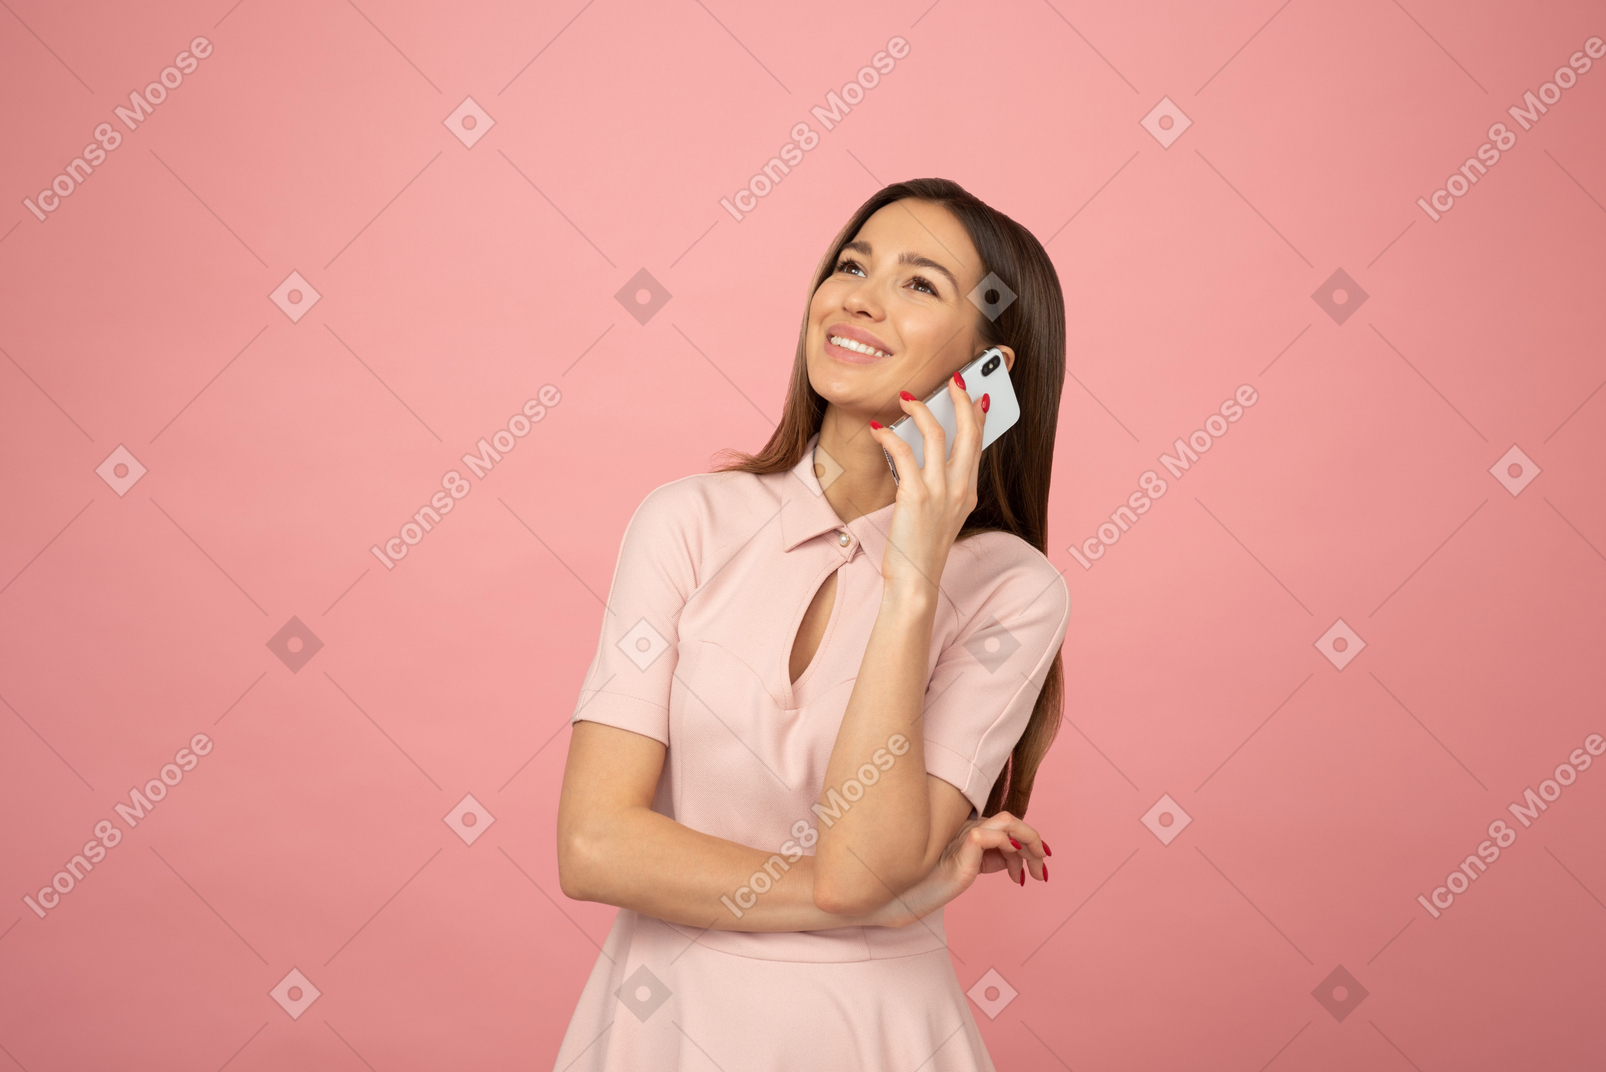 Young beautiful woman using a smartphone